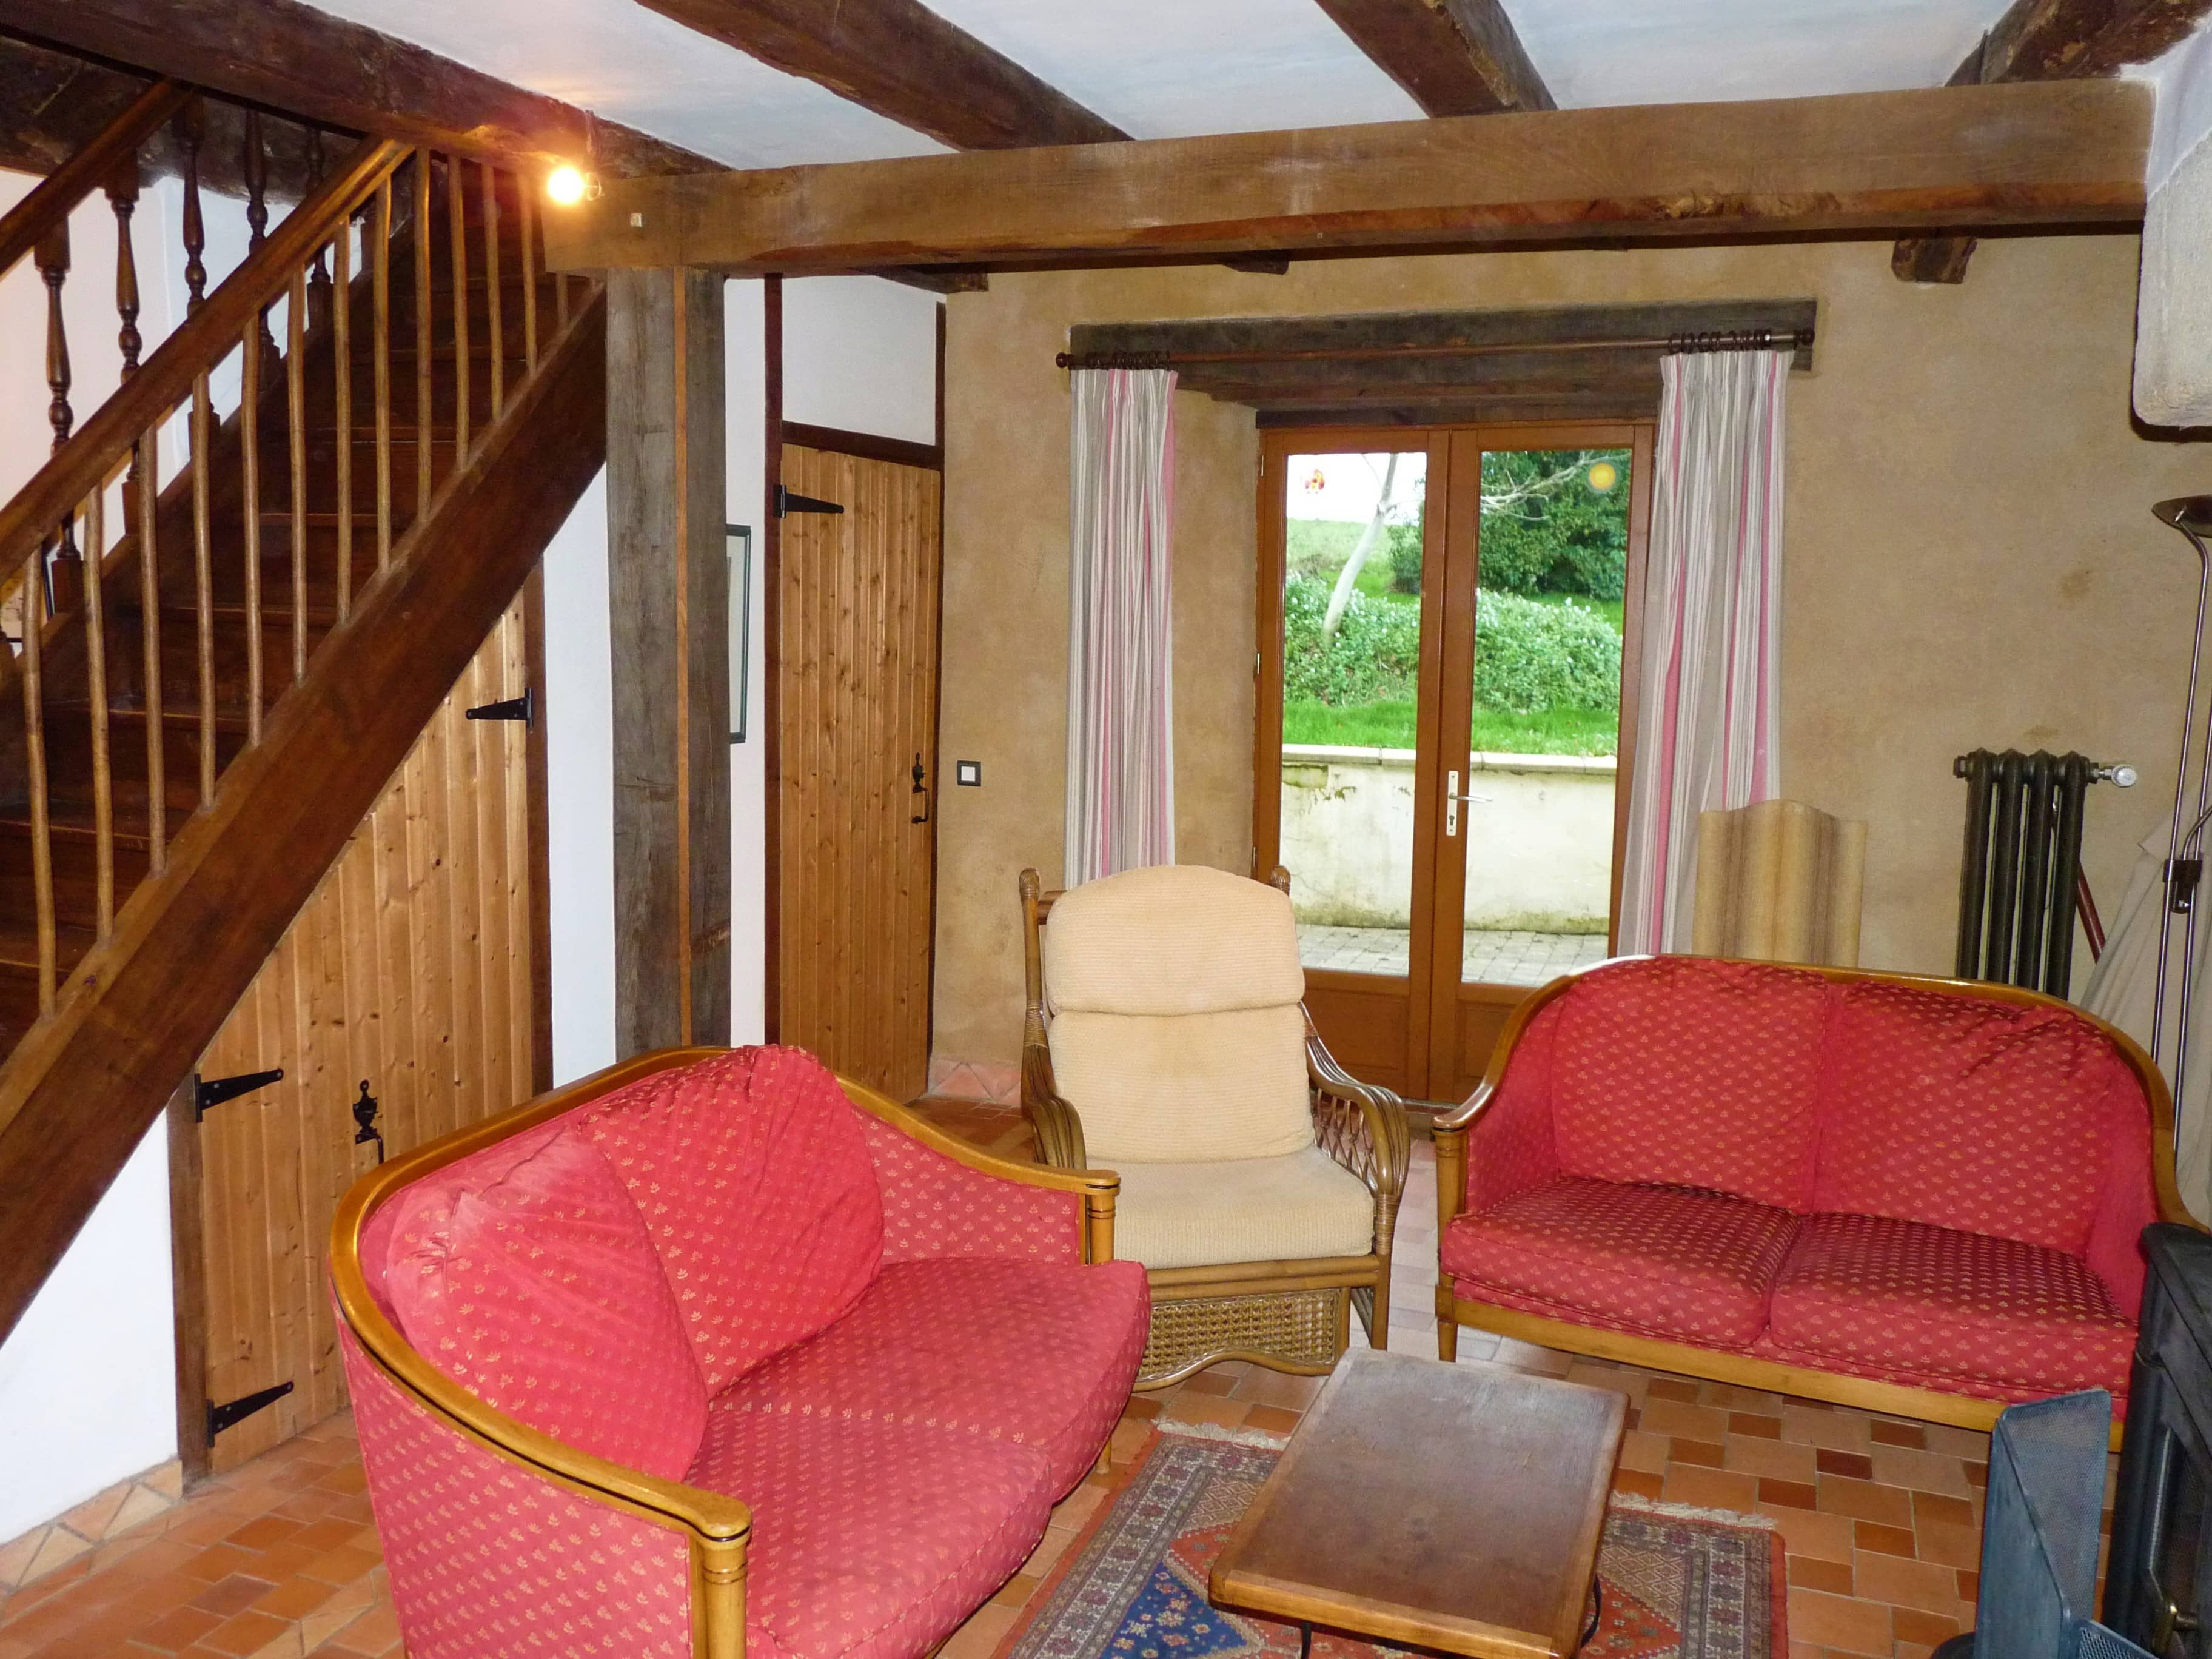 Comfortable living room of La Julerie cottage in Brittany, France, with a view of the surrounding nature and equipped with modern furniture. Ideal for relaxing after a day of sightseeing in Brittany.